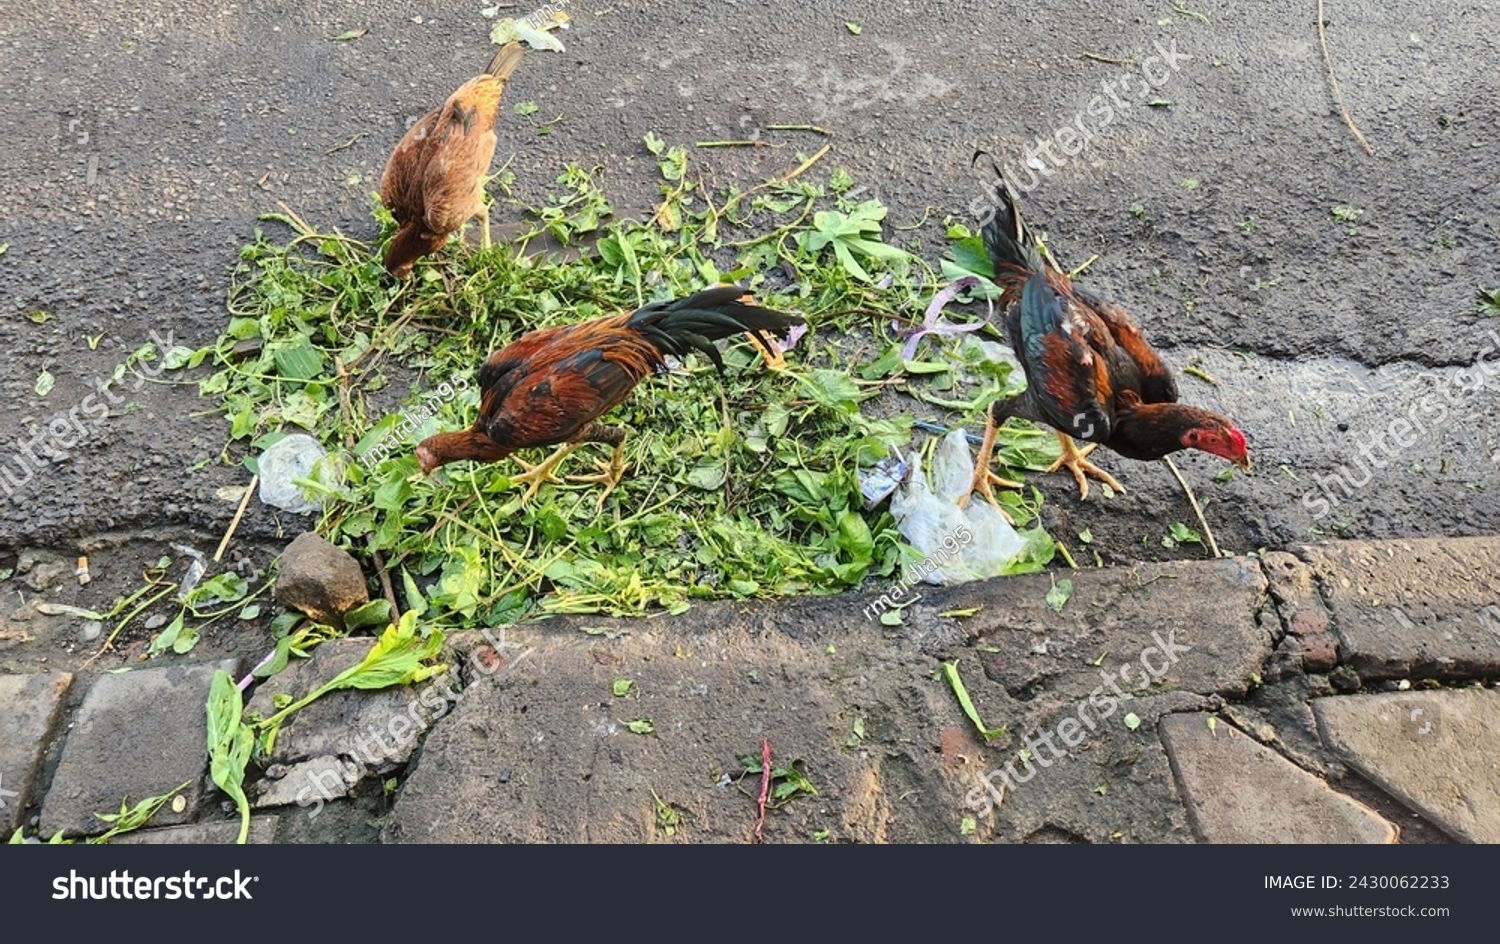 Organic garbages with contamine plastics are eaten by chickens. Dangerous for them and environment